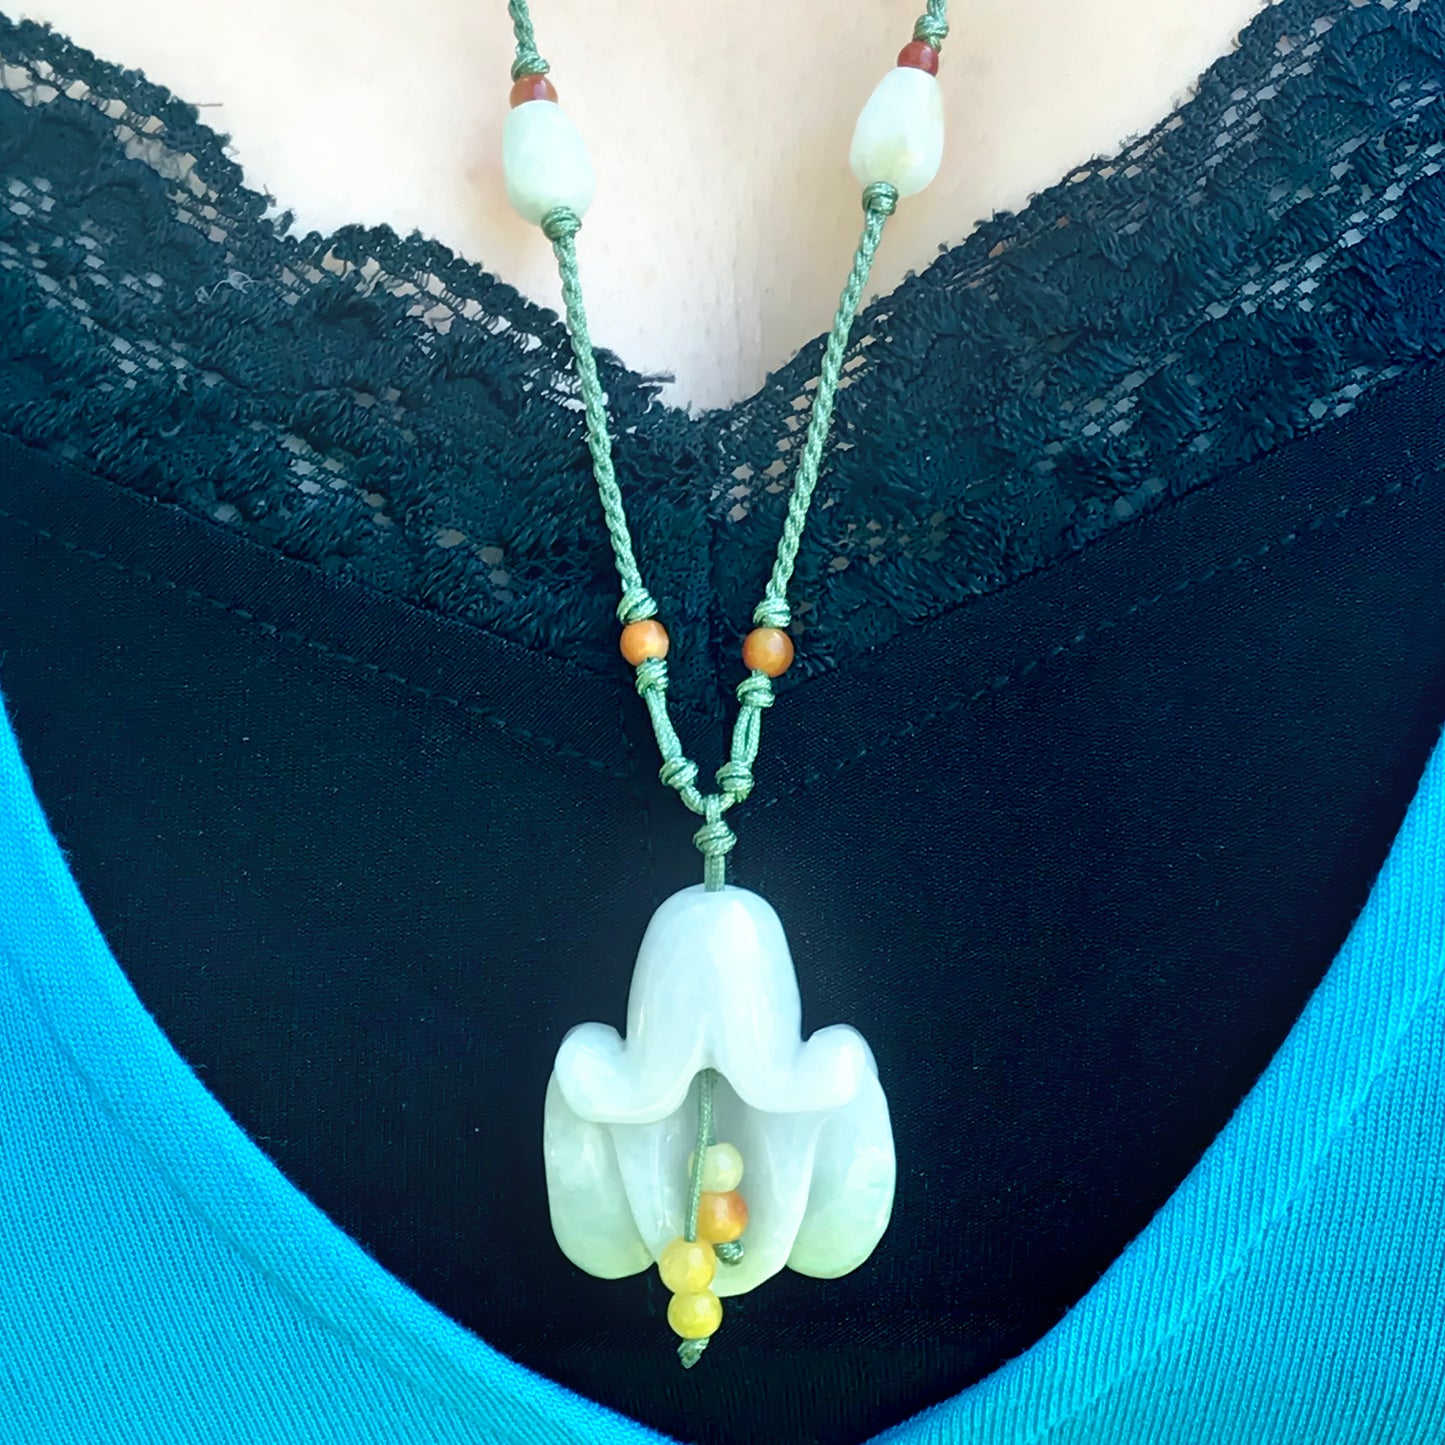 Look Radiant with a Bellflower Handmade Jade Necklace